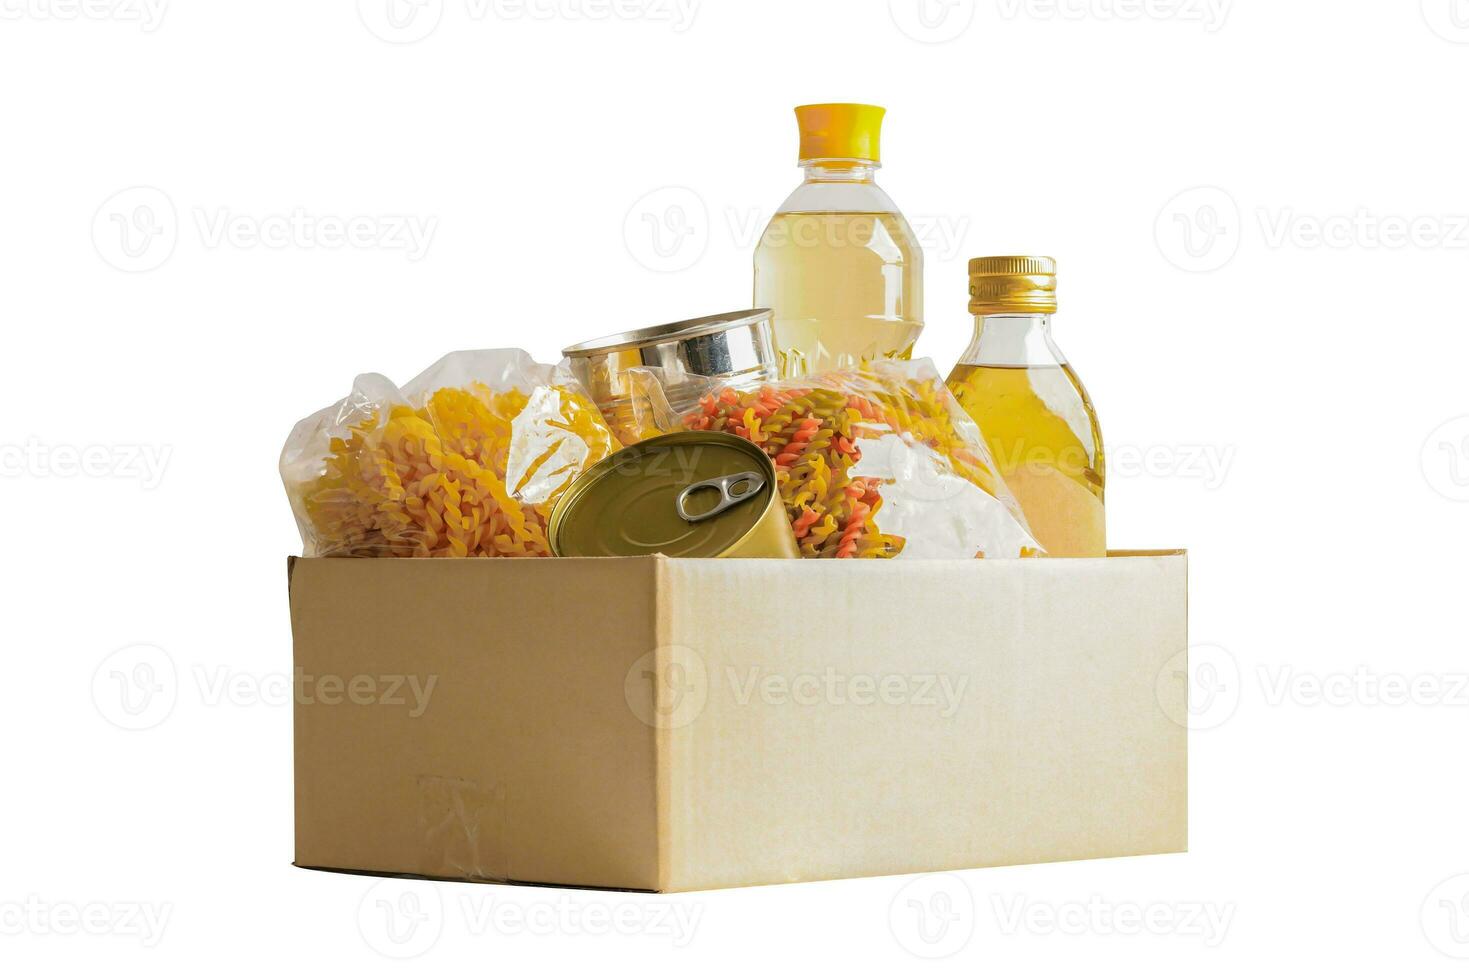 Foodstuffs in donation box isolated on white background with clipping path for volunteer to help people. photo